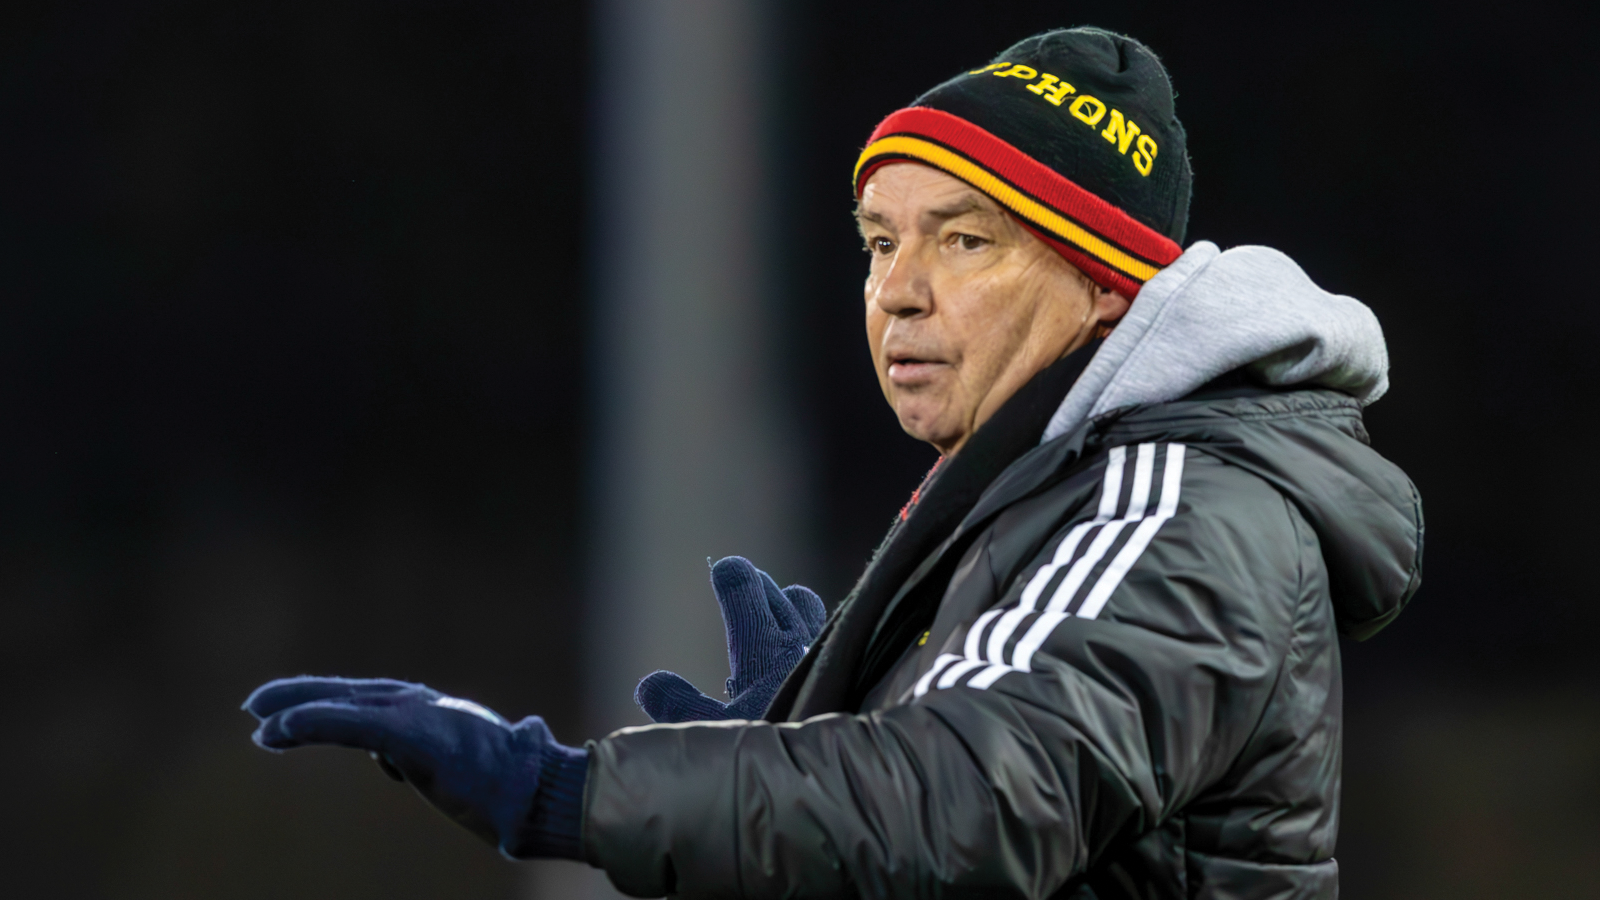 Guelph men's soccer coach Keith mason wearing a Gryphons toque and winter jacket while looking outward toward the field